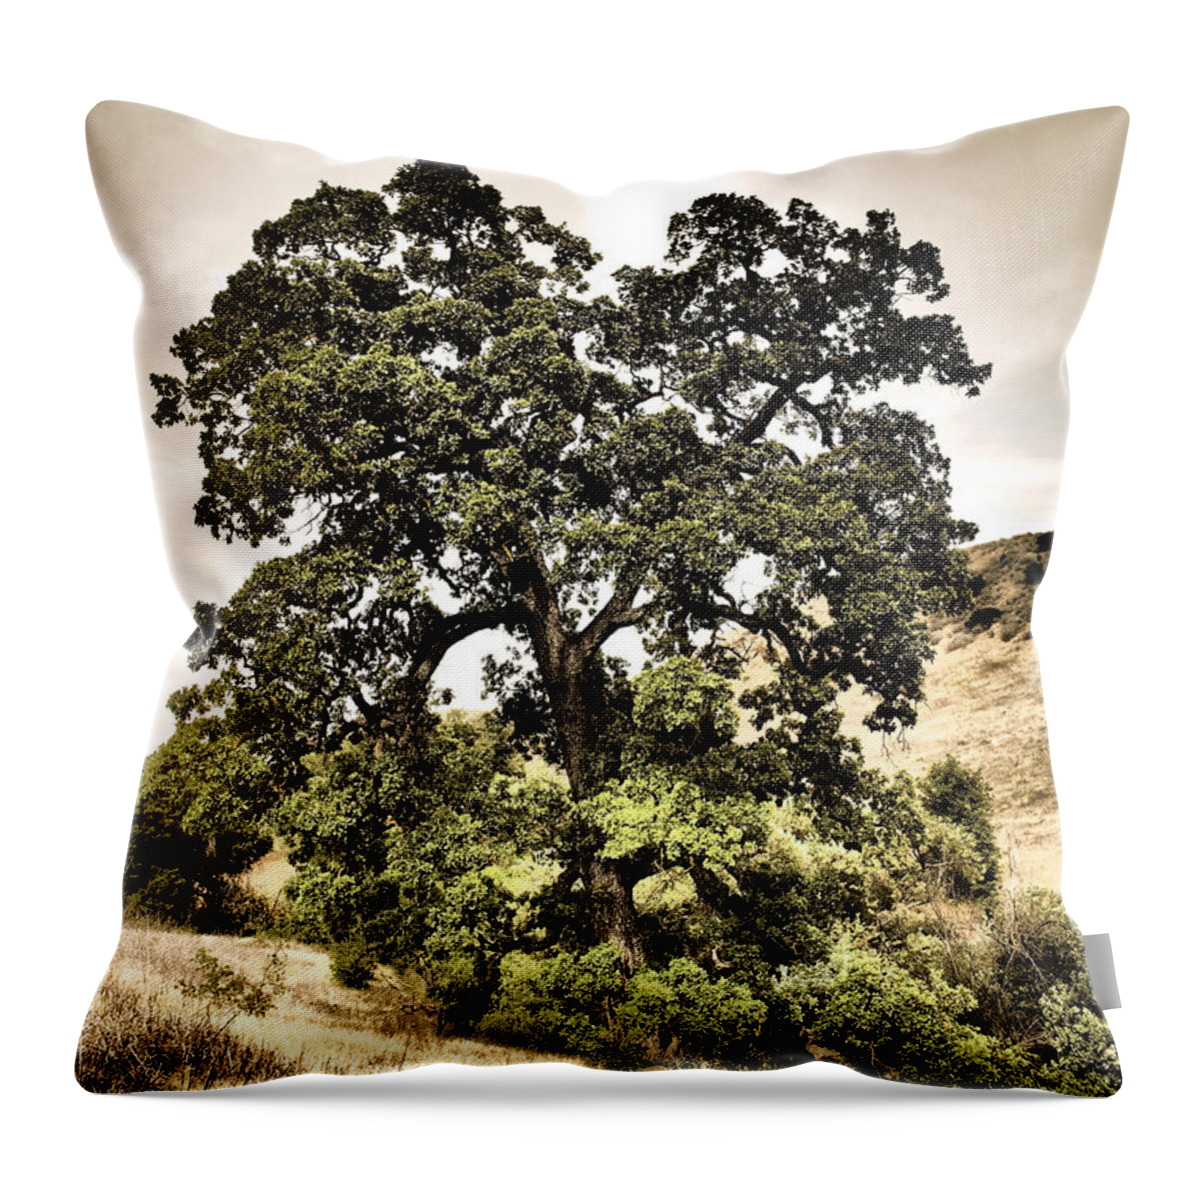 California Throw Pillow featuring the photograph Valley Oak by Parrish Todd